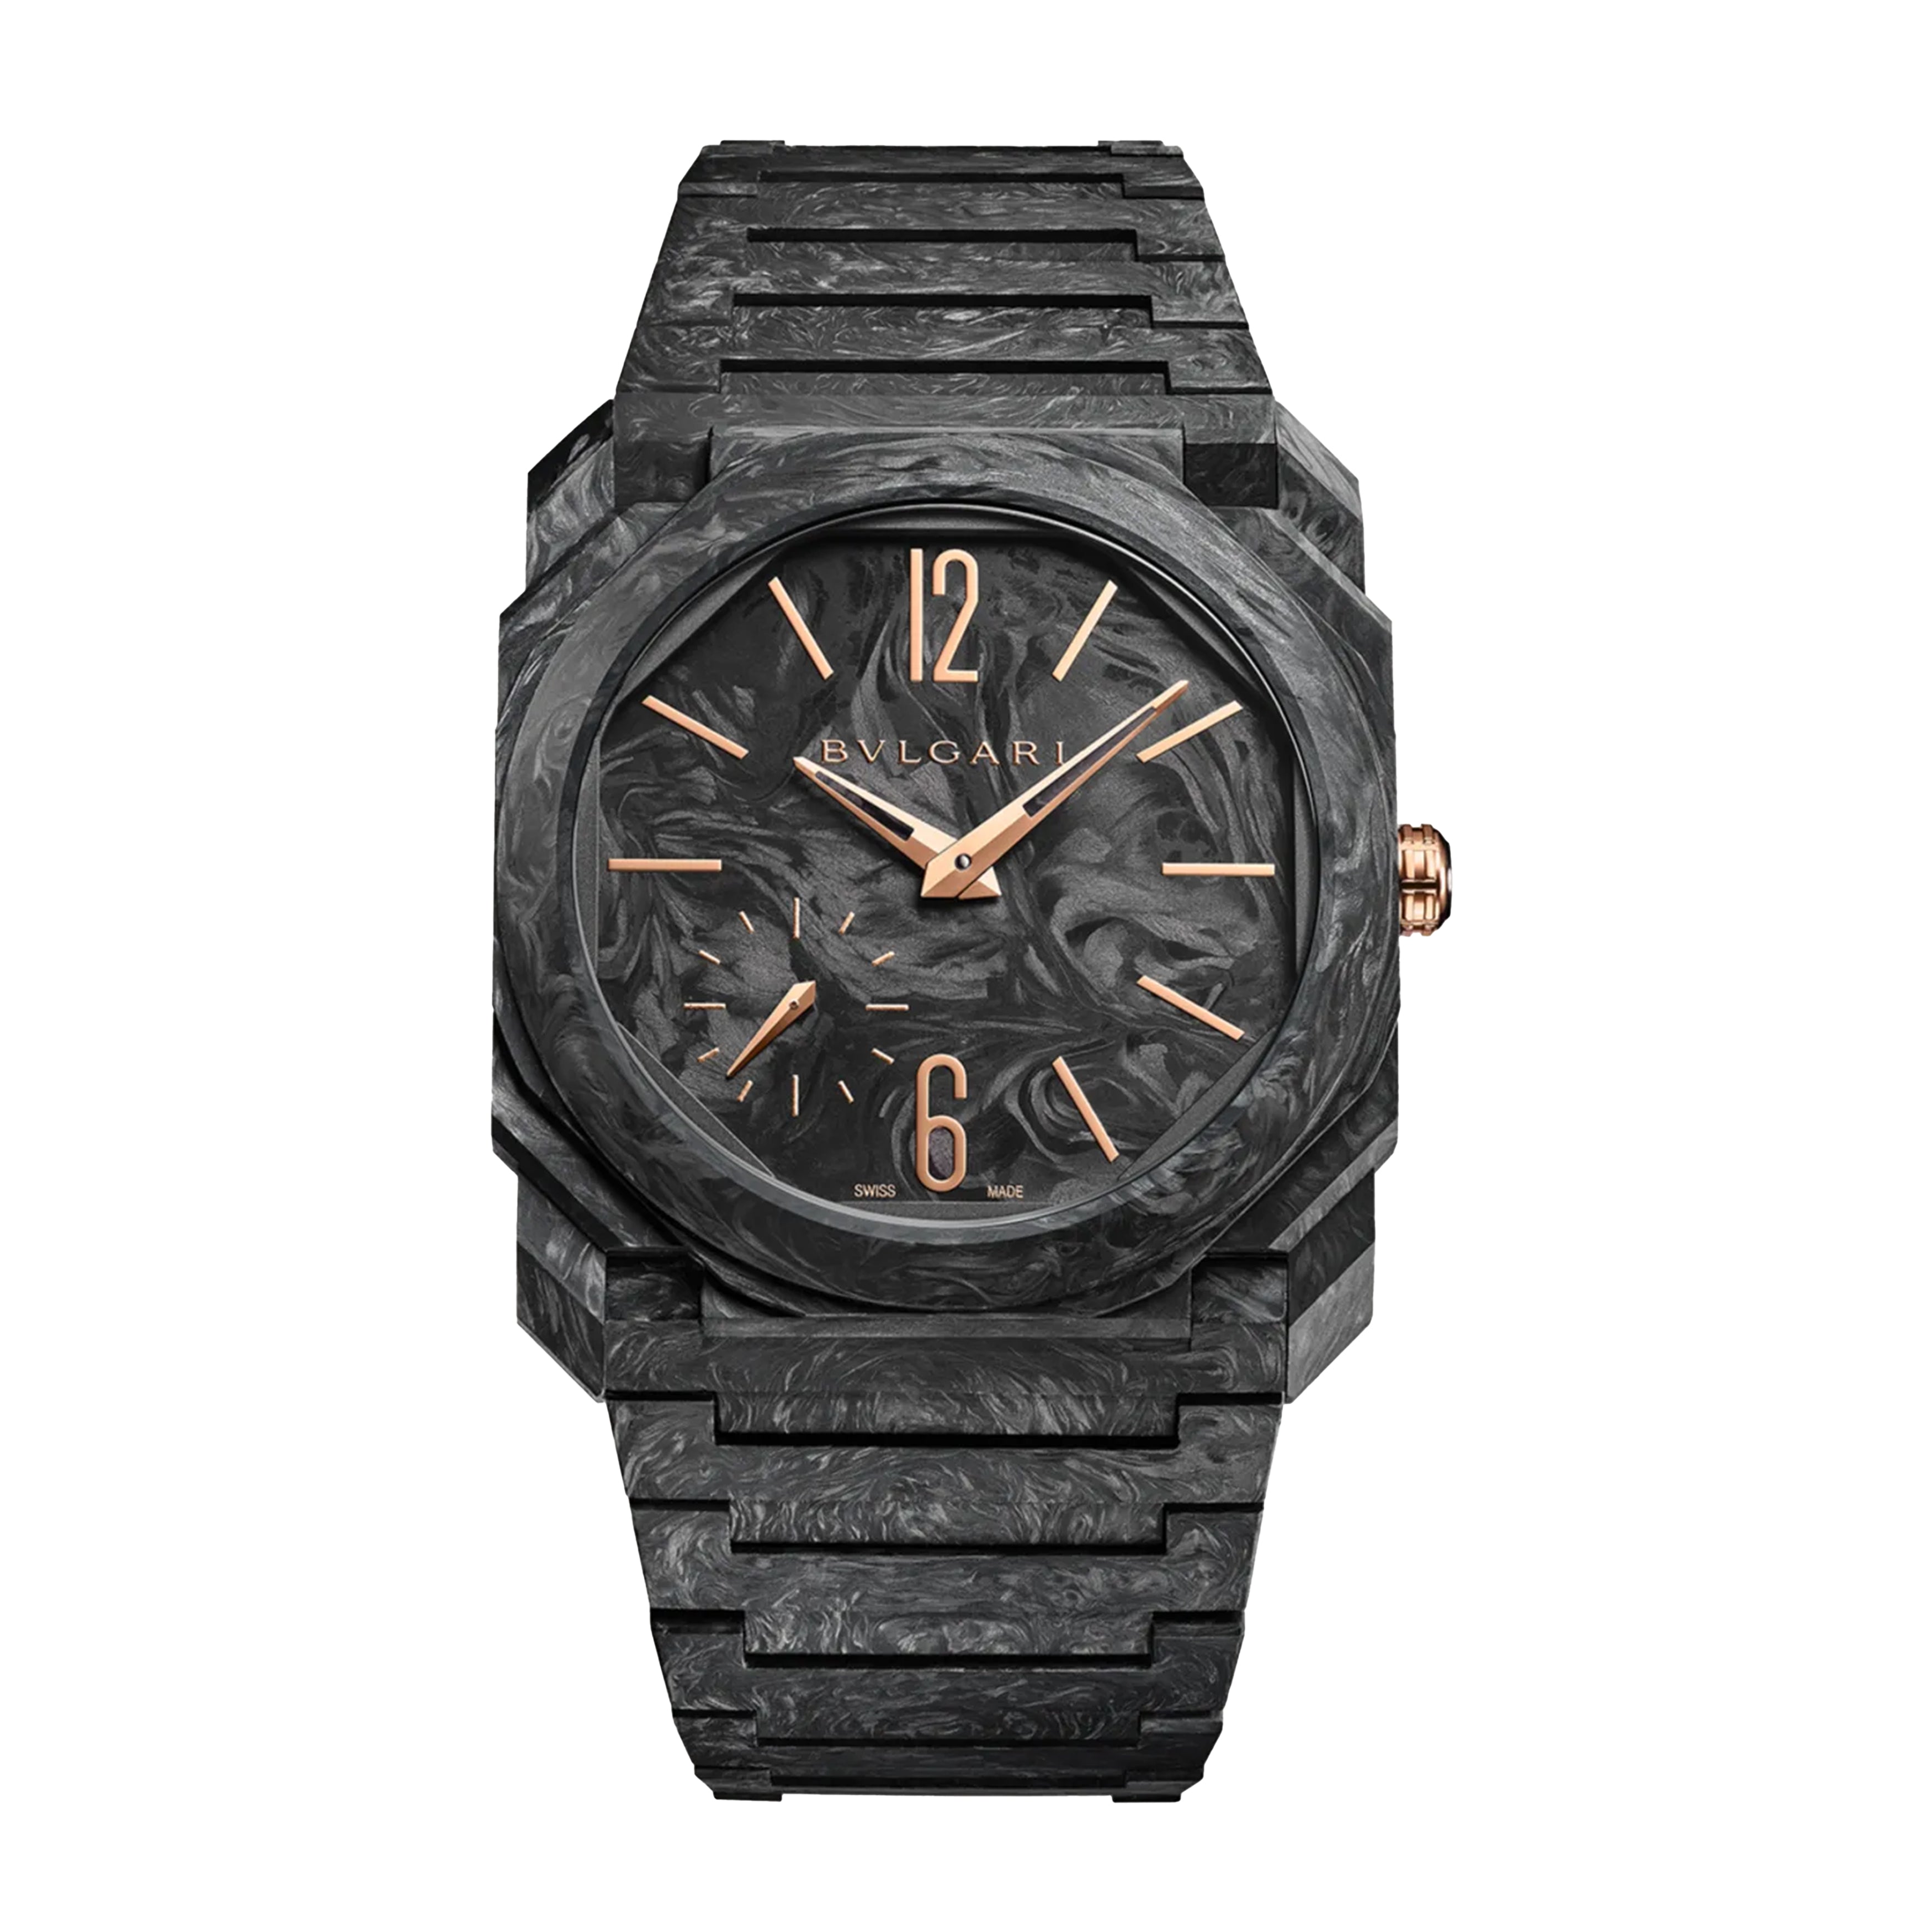 Bulgari Octo Finissimo CarboGold Automatic Watch, 40mm Black DIal, 103779